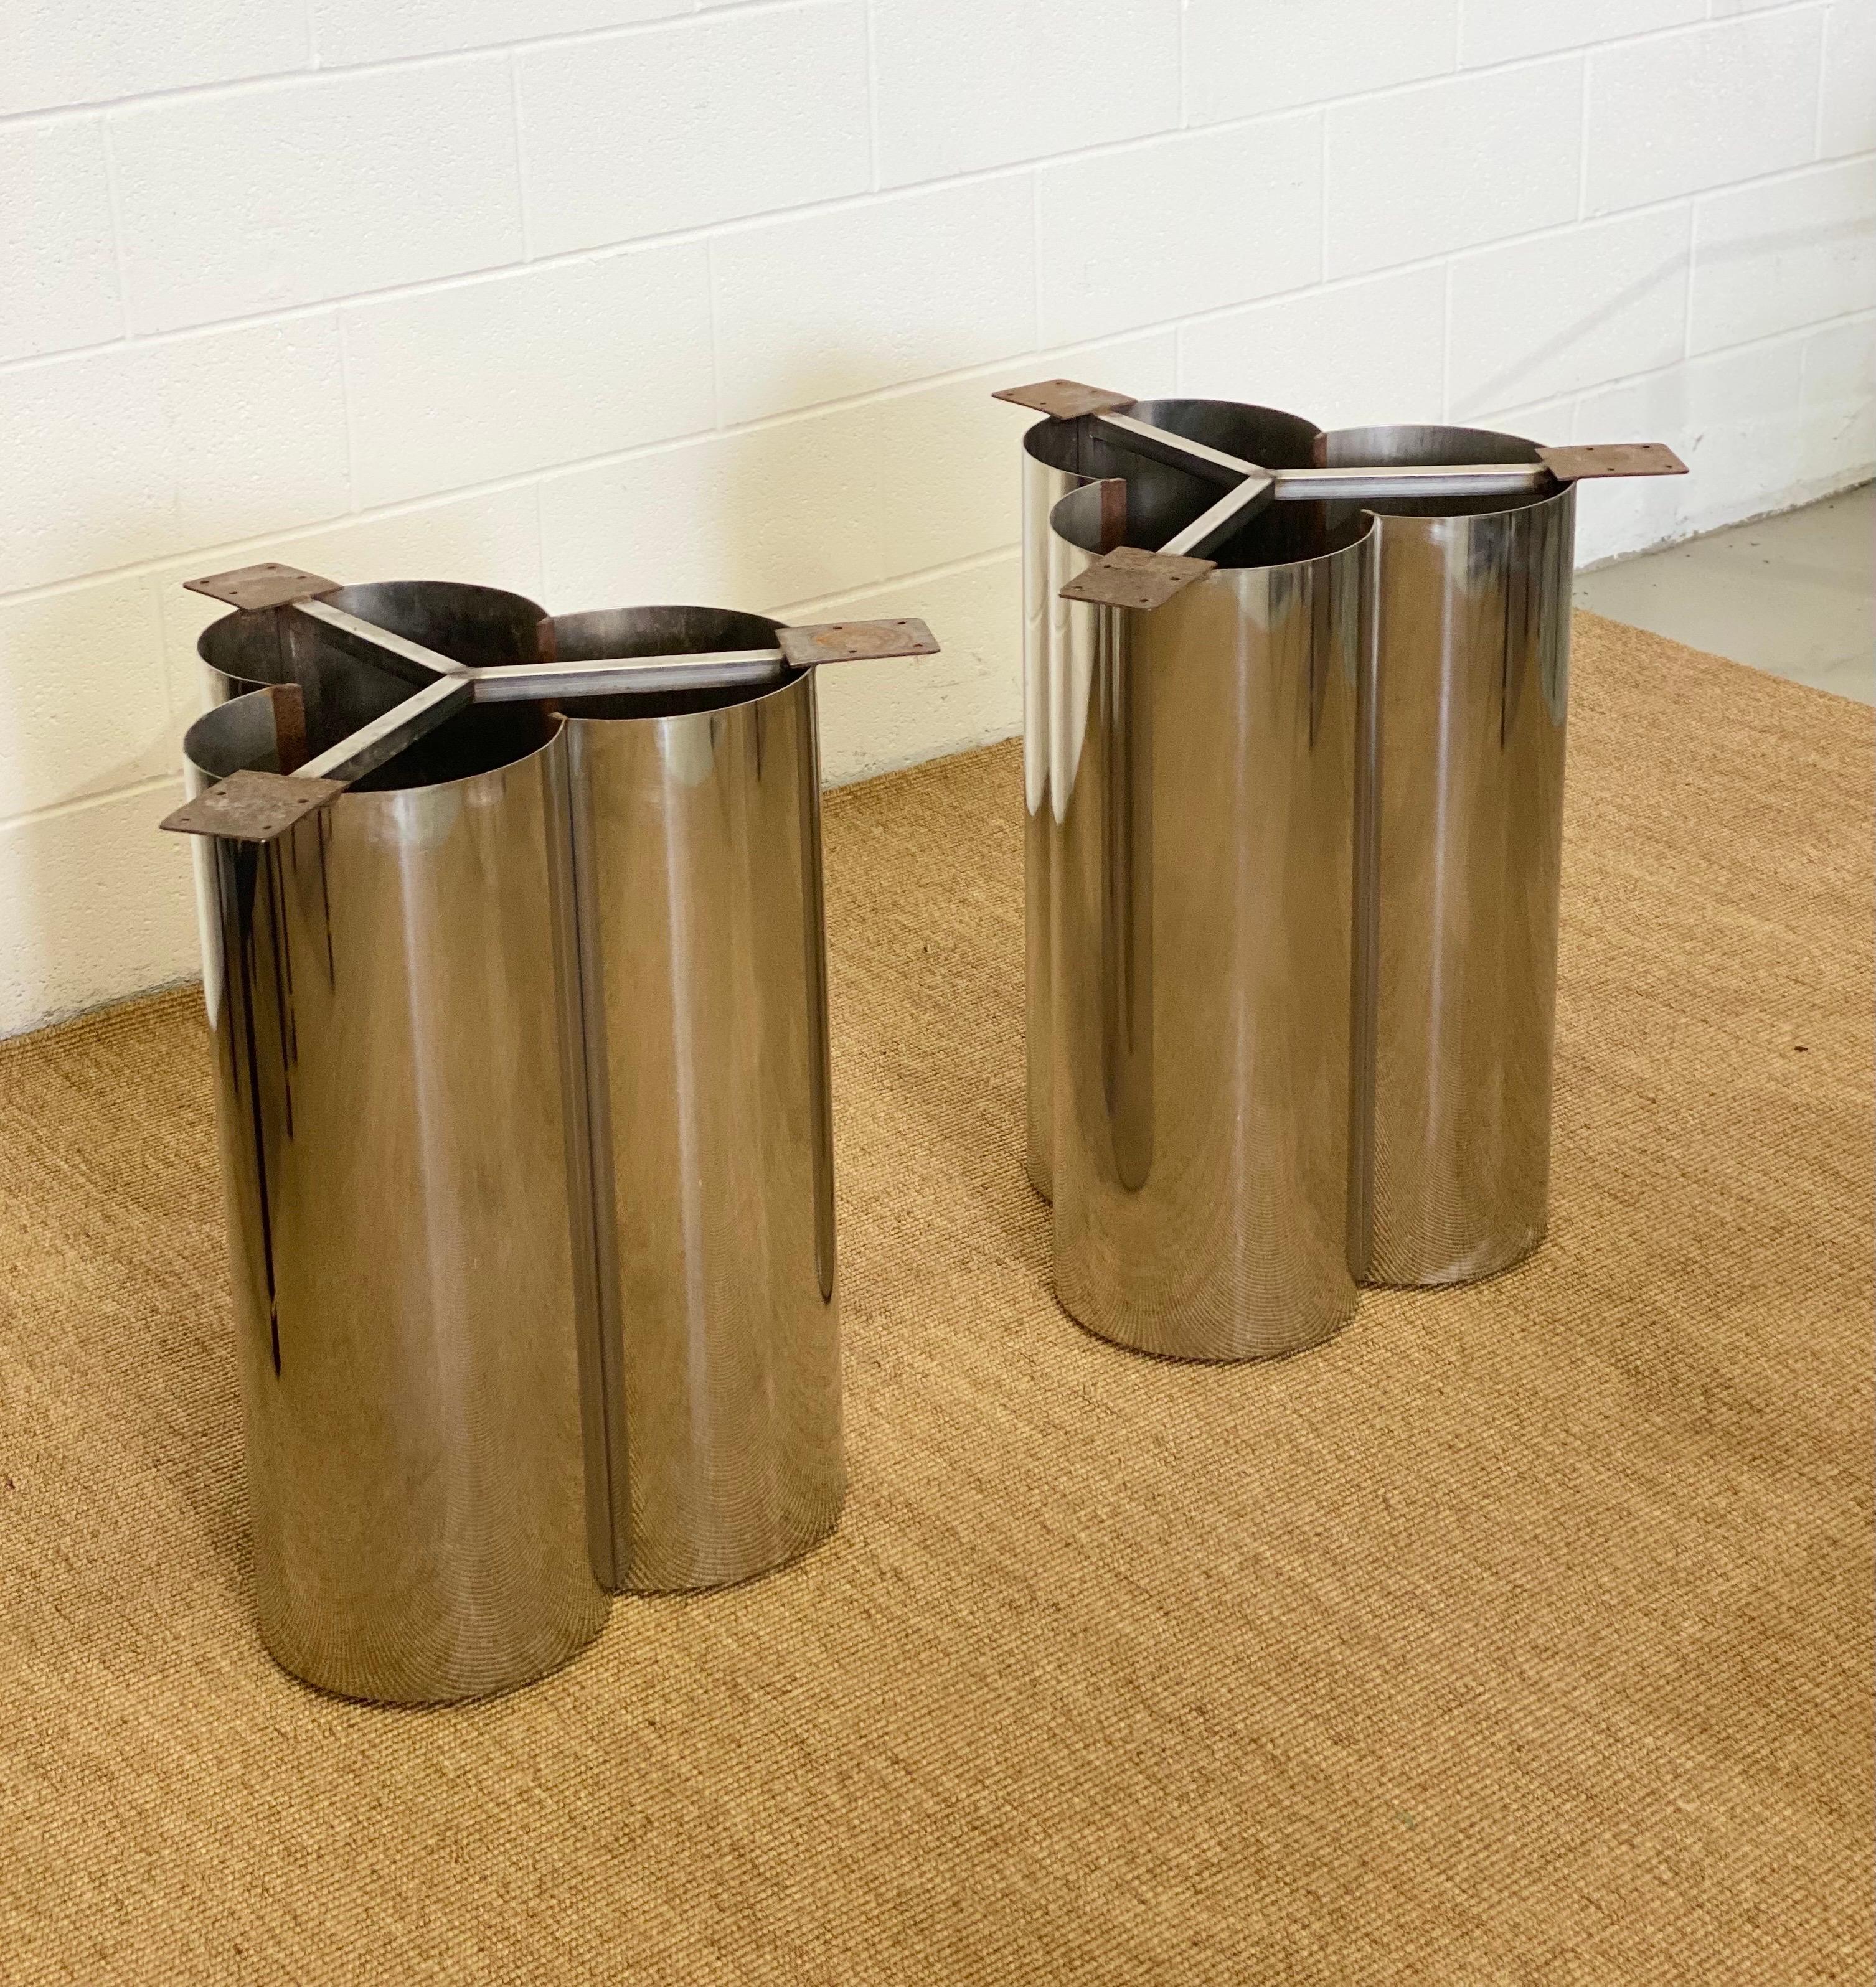 1970s Mastercraft Stainless Steel Table Pedestals – a Pair For Sale 1